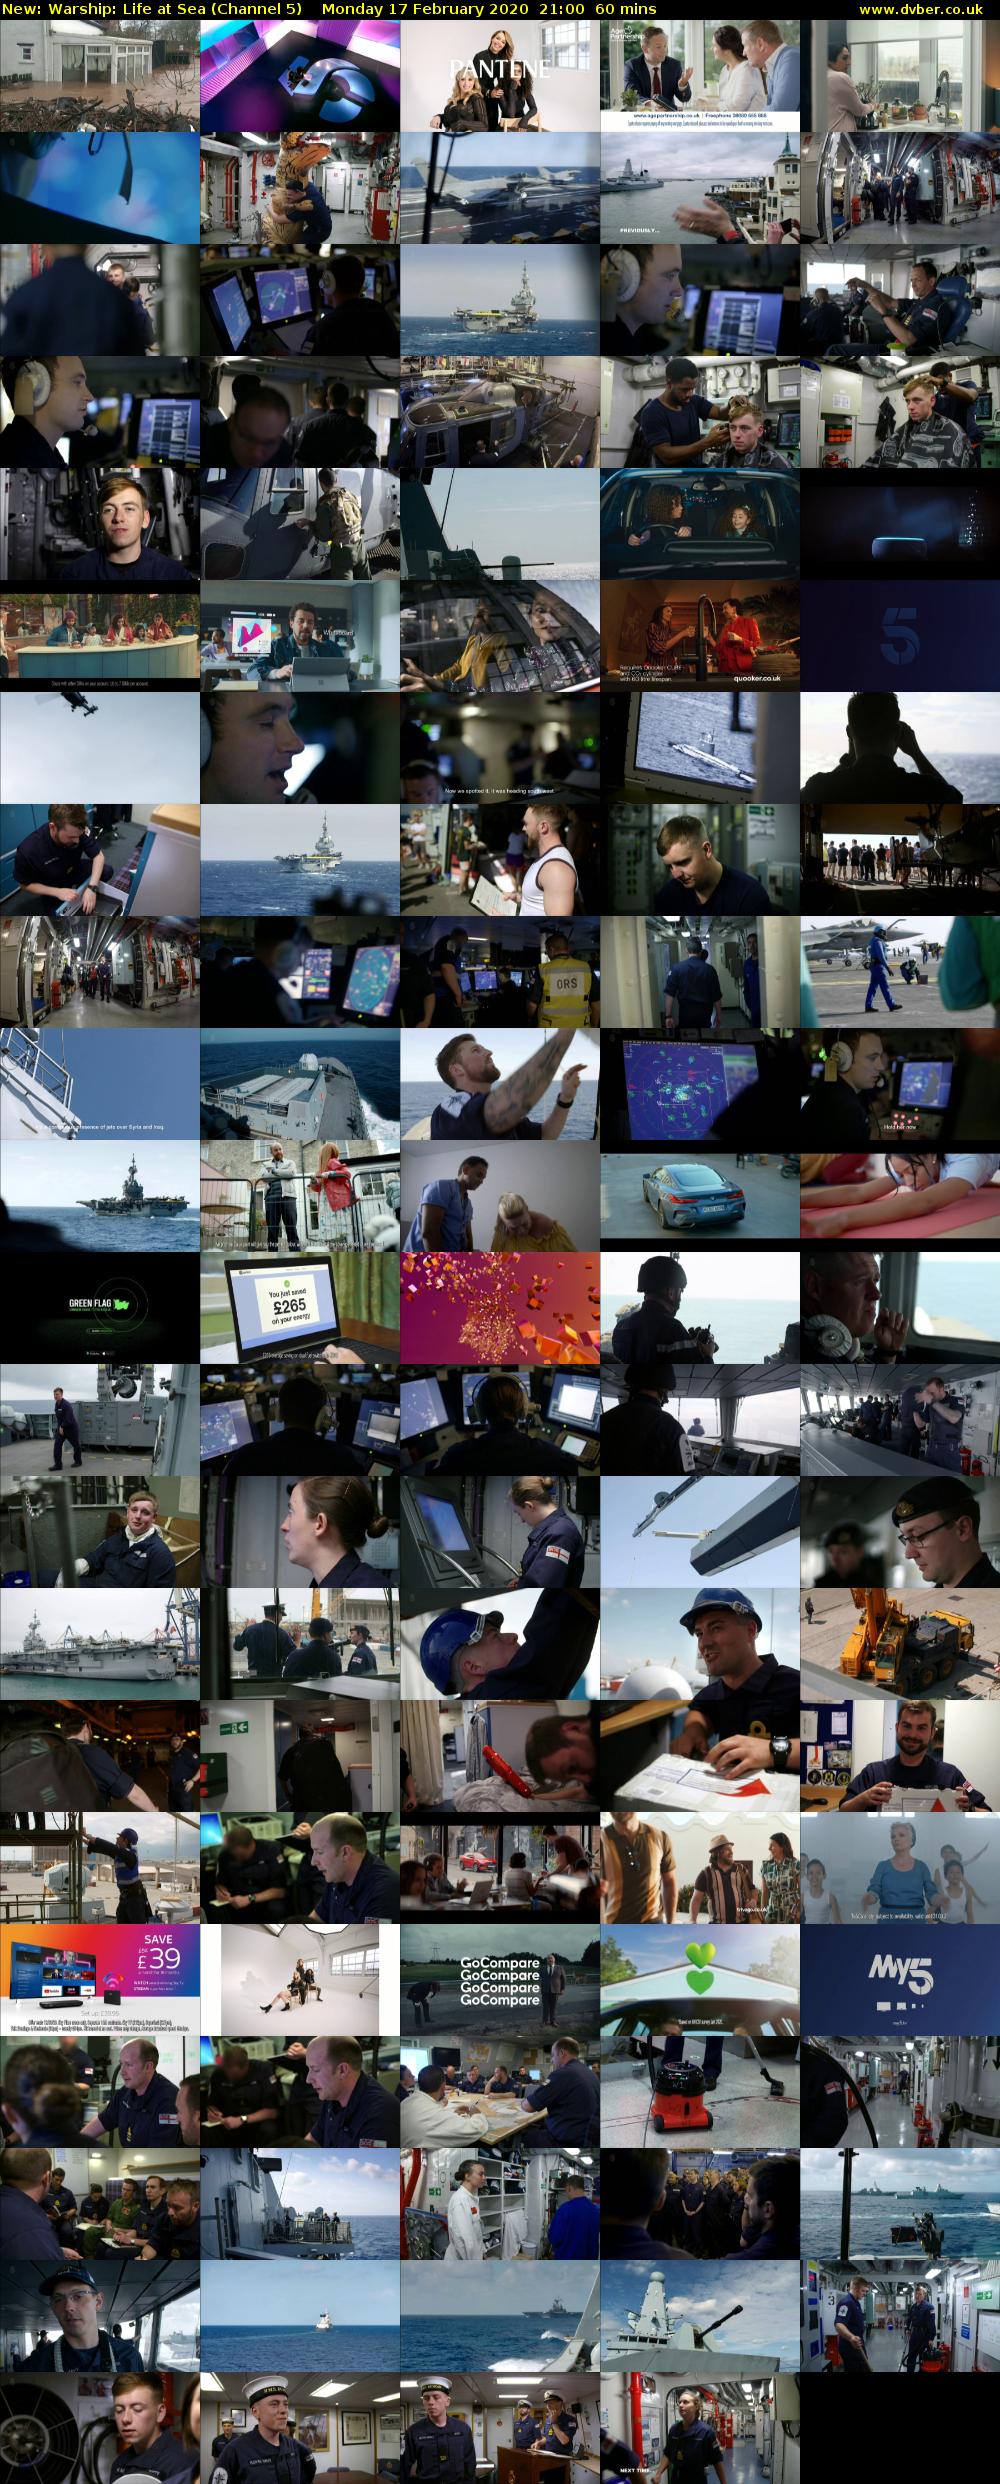 Warship: Life at Sea (Channel 5) Monday 17 February 2020 21:00 - 22:00